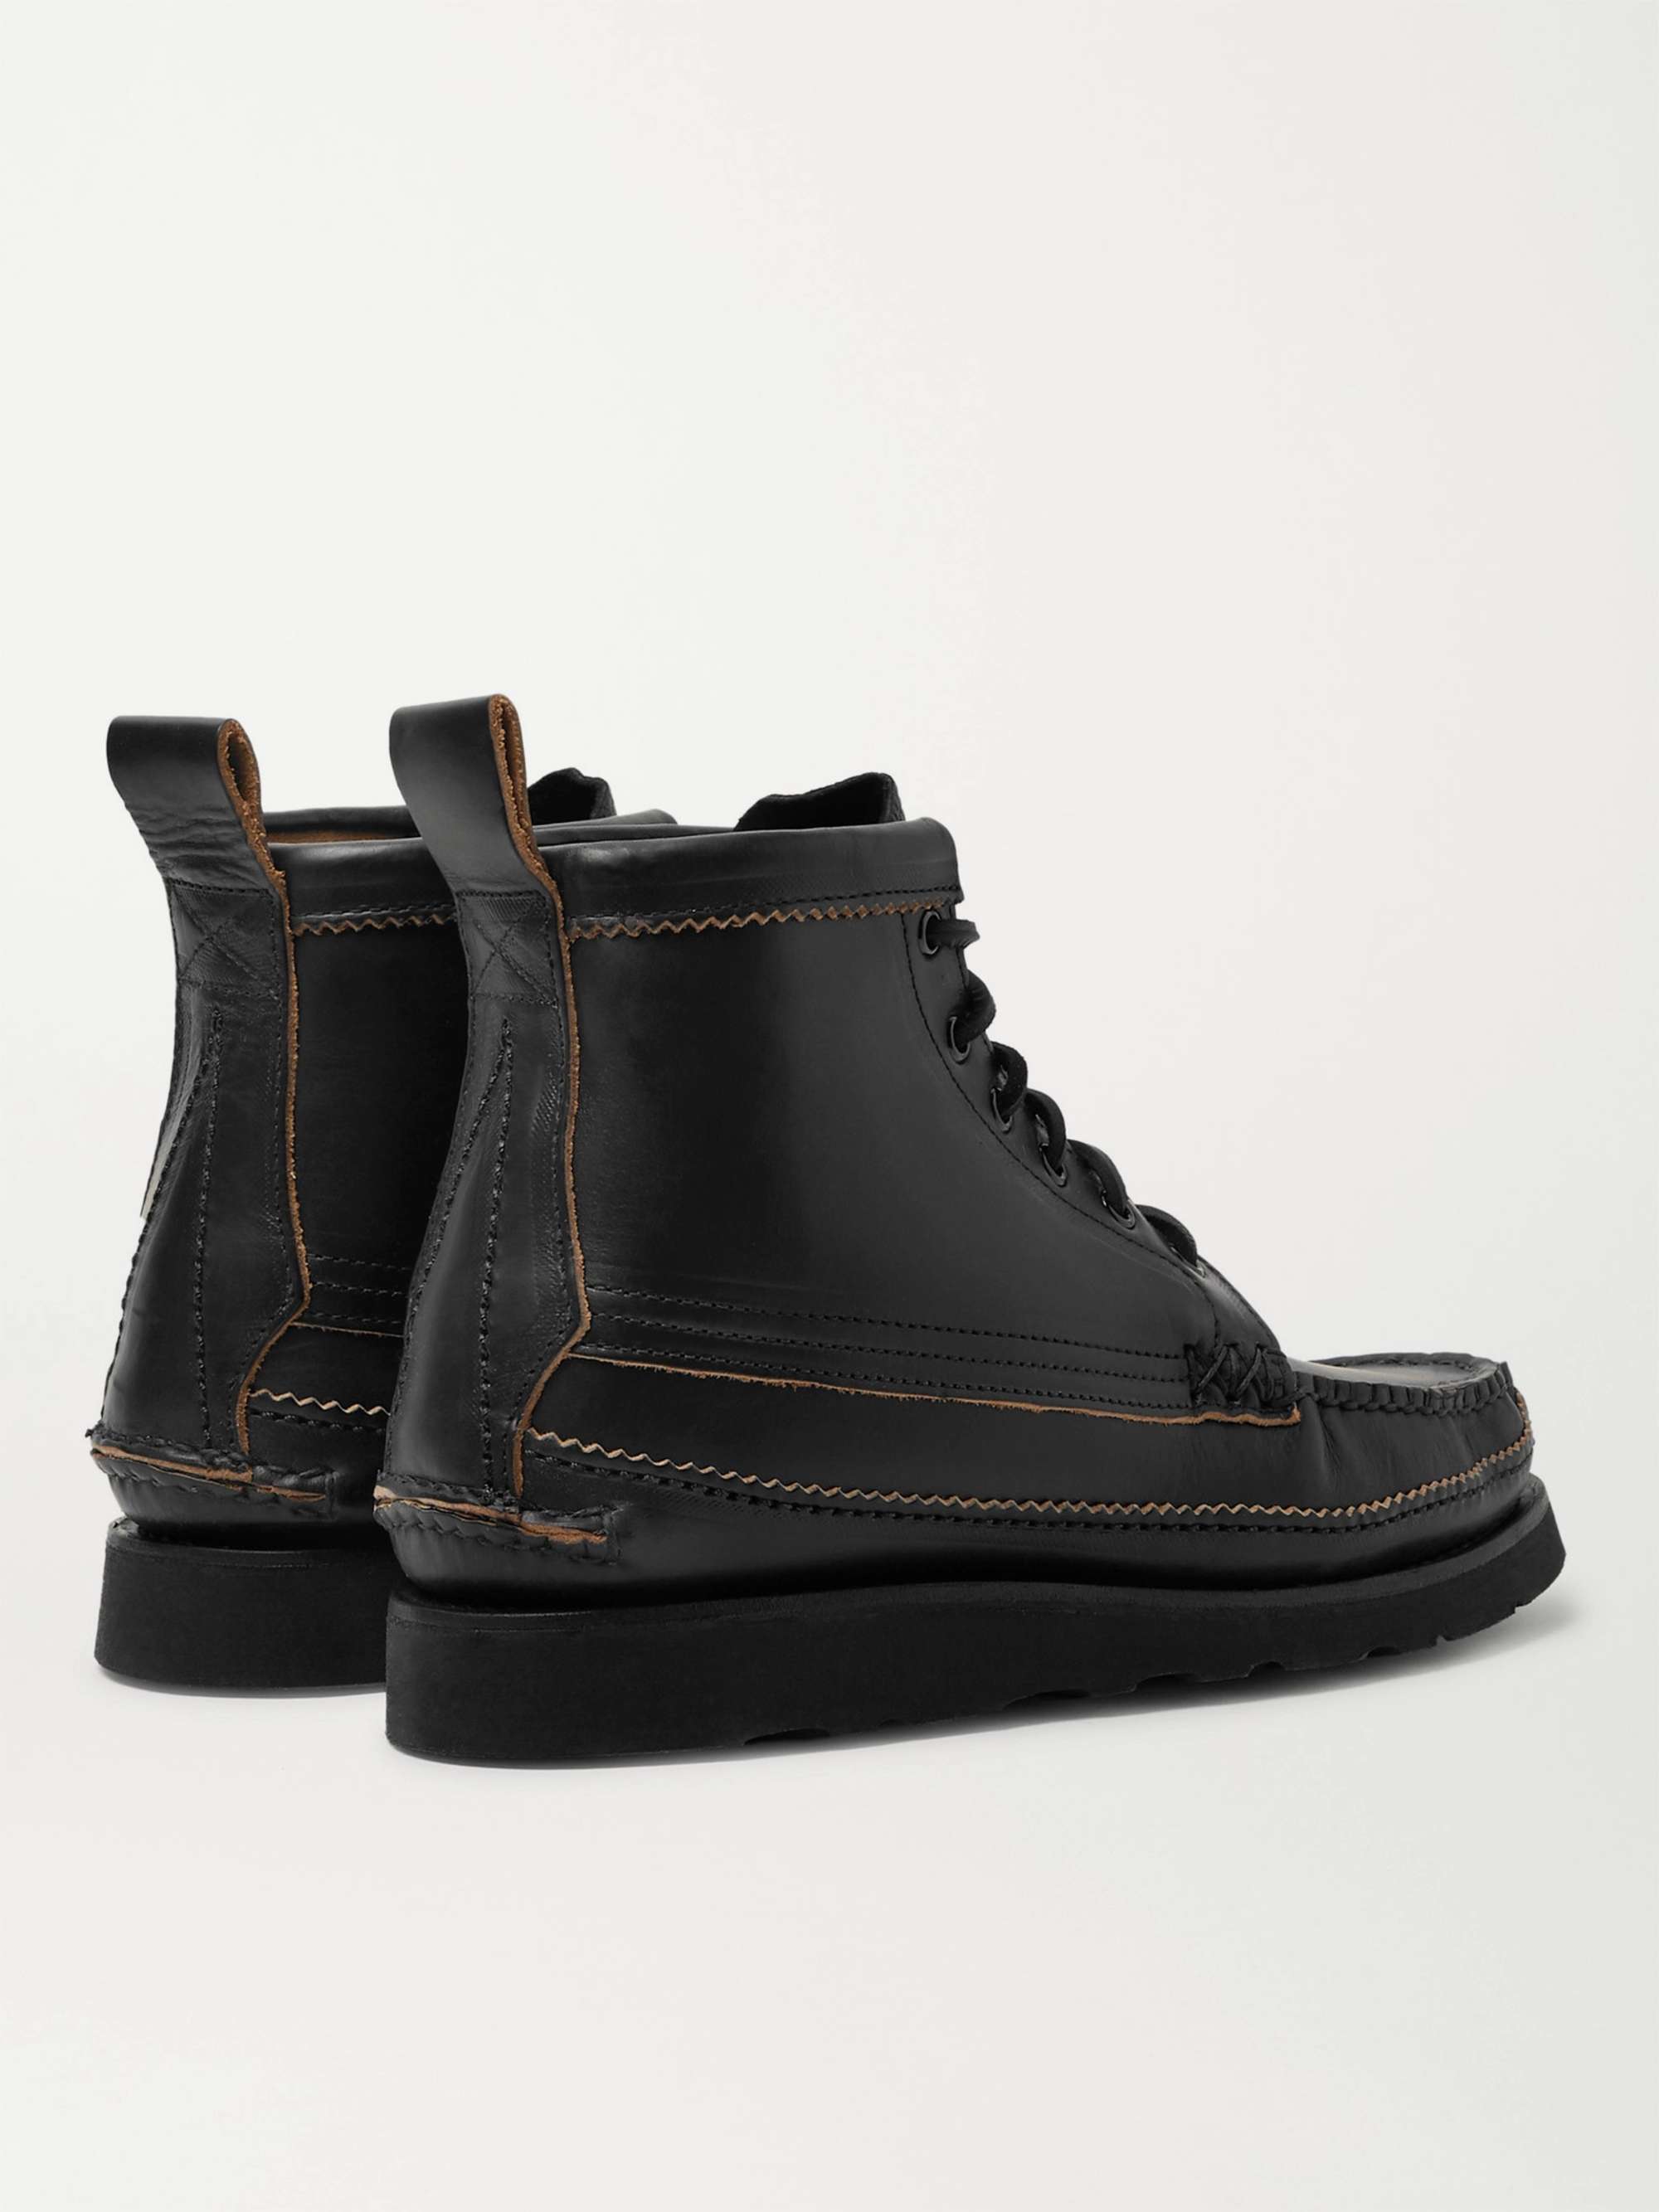 YUKETEN Maine Guide 6 Eye Smooth and Full-Grain Leather Boots